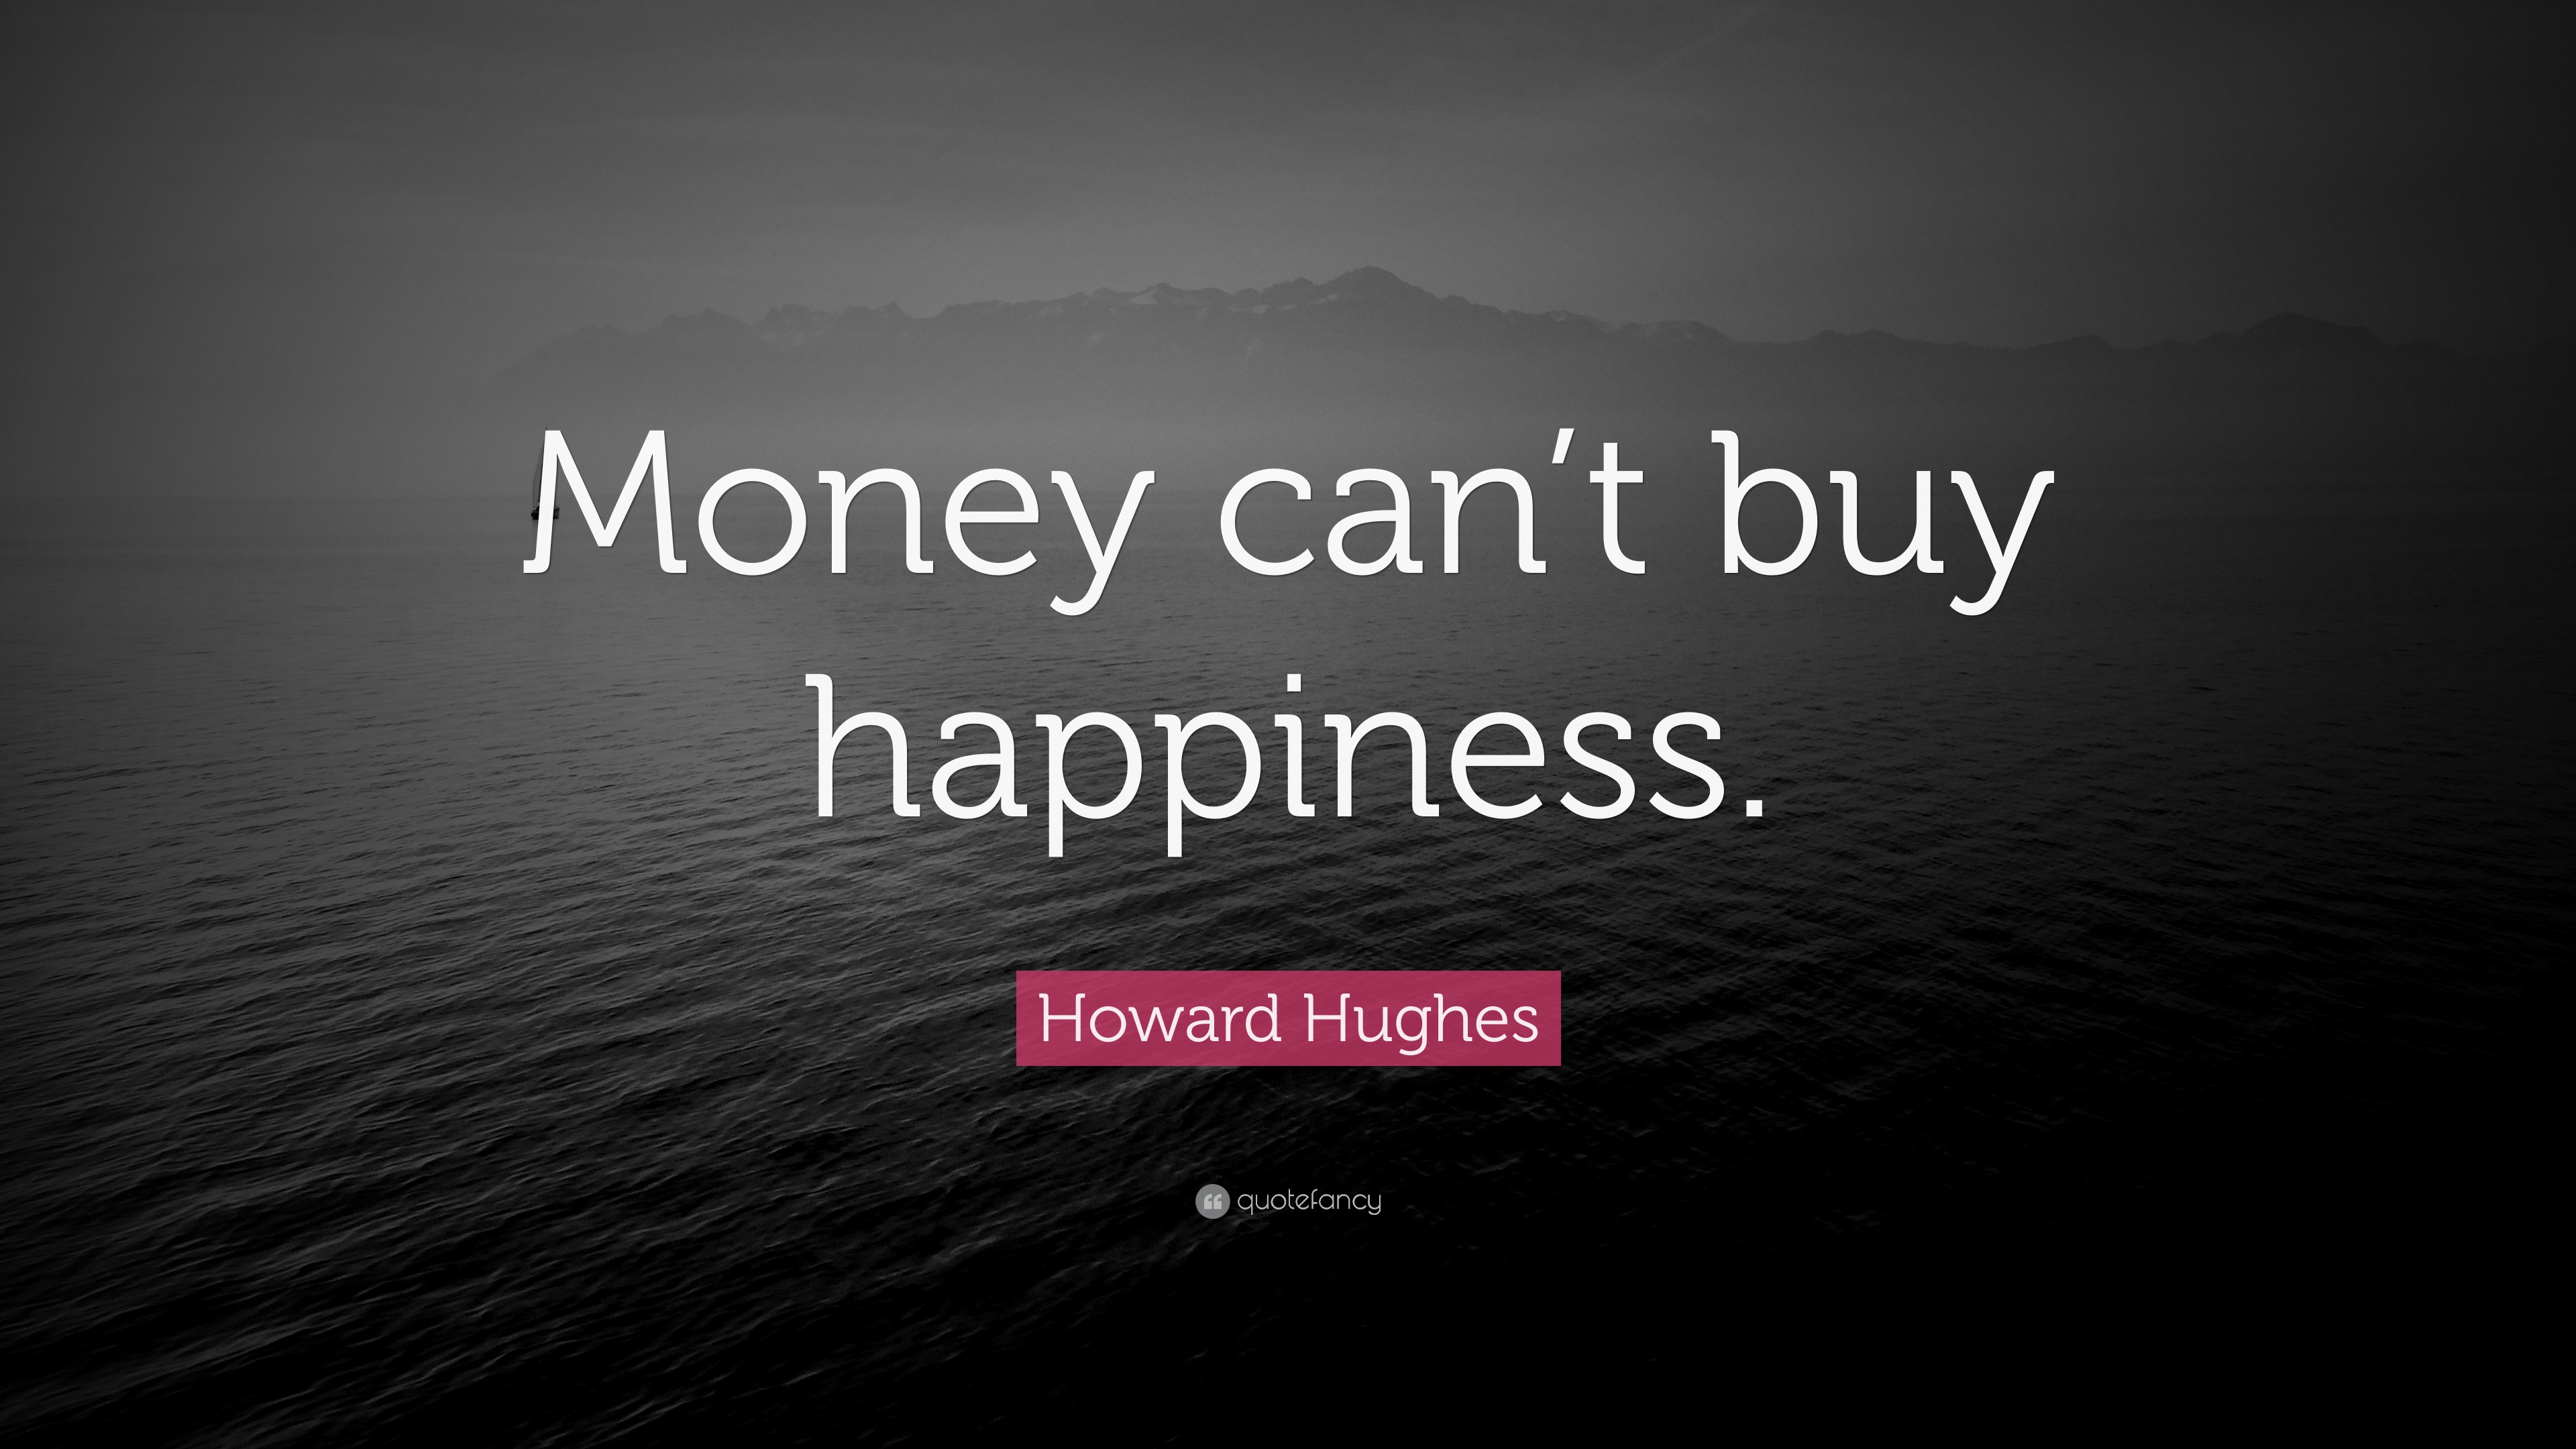 Persuasive essay about money can't buy happiness